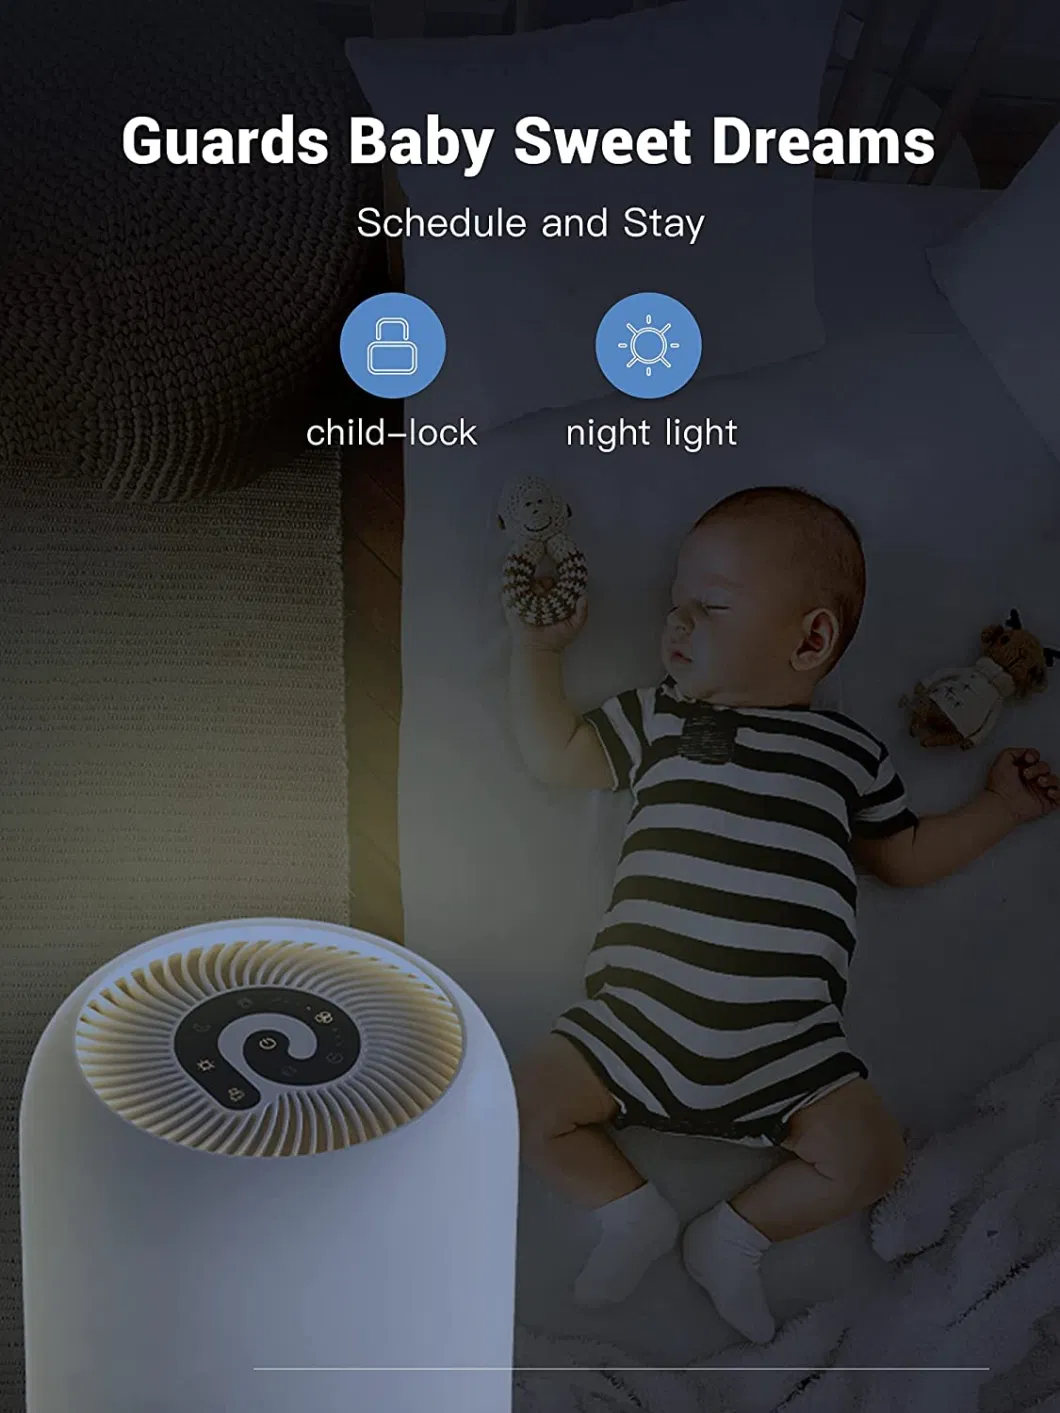 2022 Mei Awarded Sliver Award Winners Household Home Portable Ture HEPA Filter Air Purifier with Child Lock Sleep Mode for Pollen/Pet